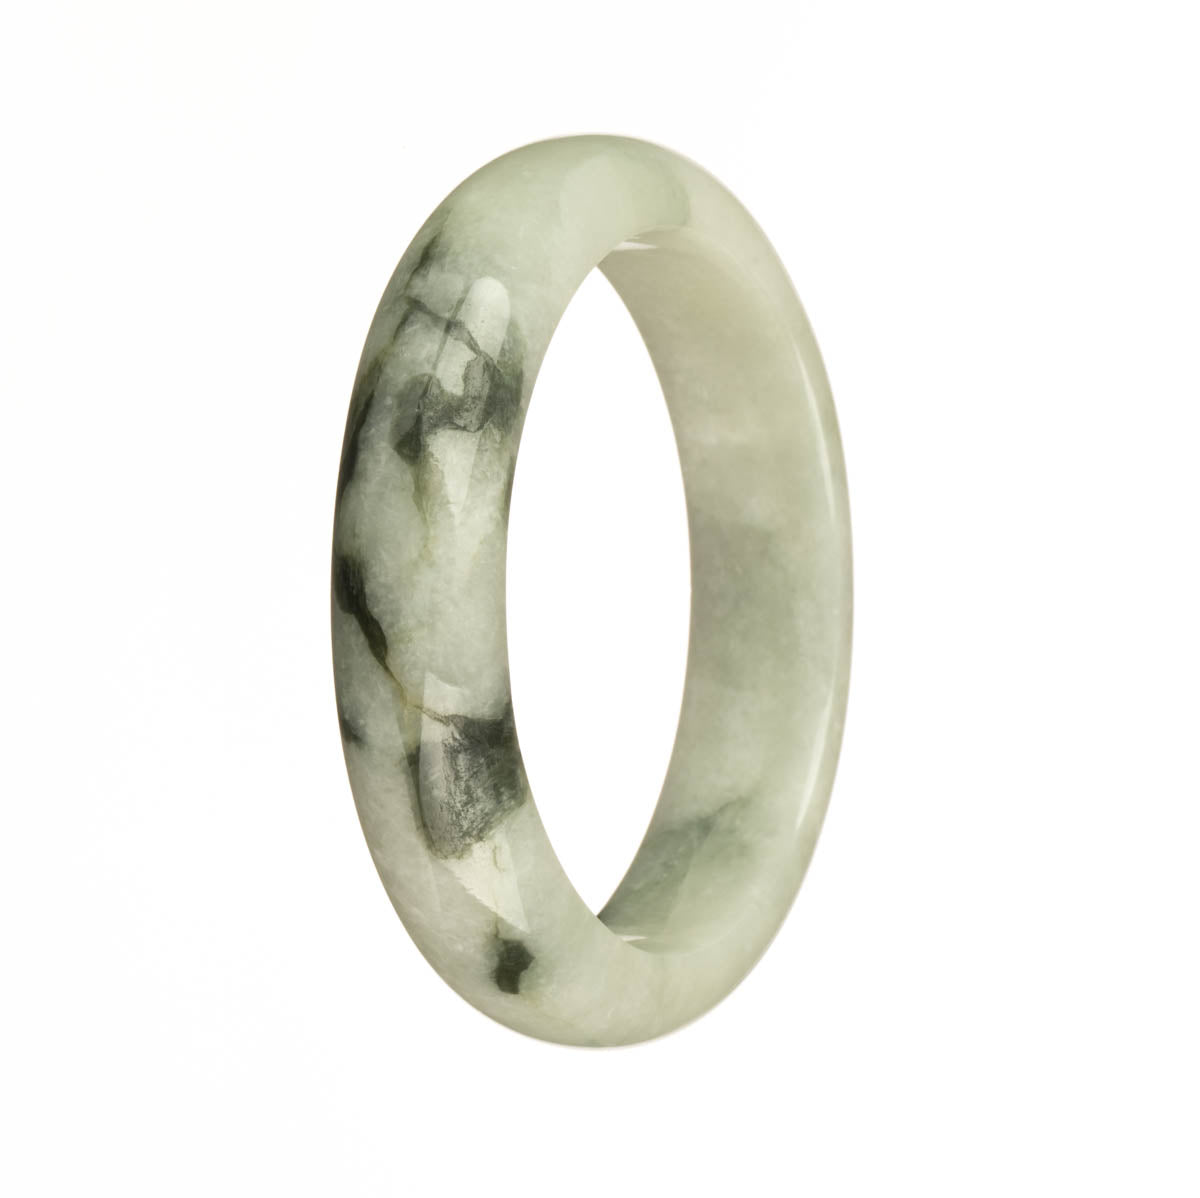 A stunning half moon-shaped Burma Jade bracelet, featuring authentic untreated white jade with dark green patterns. Perfect for adding a touch of elegance to any outfit.